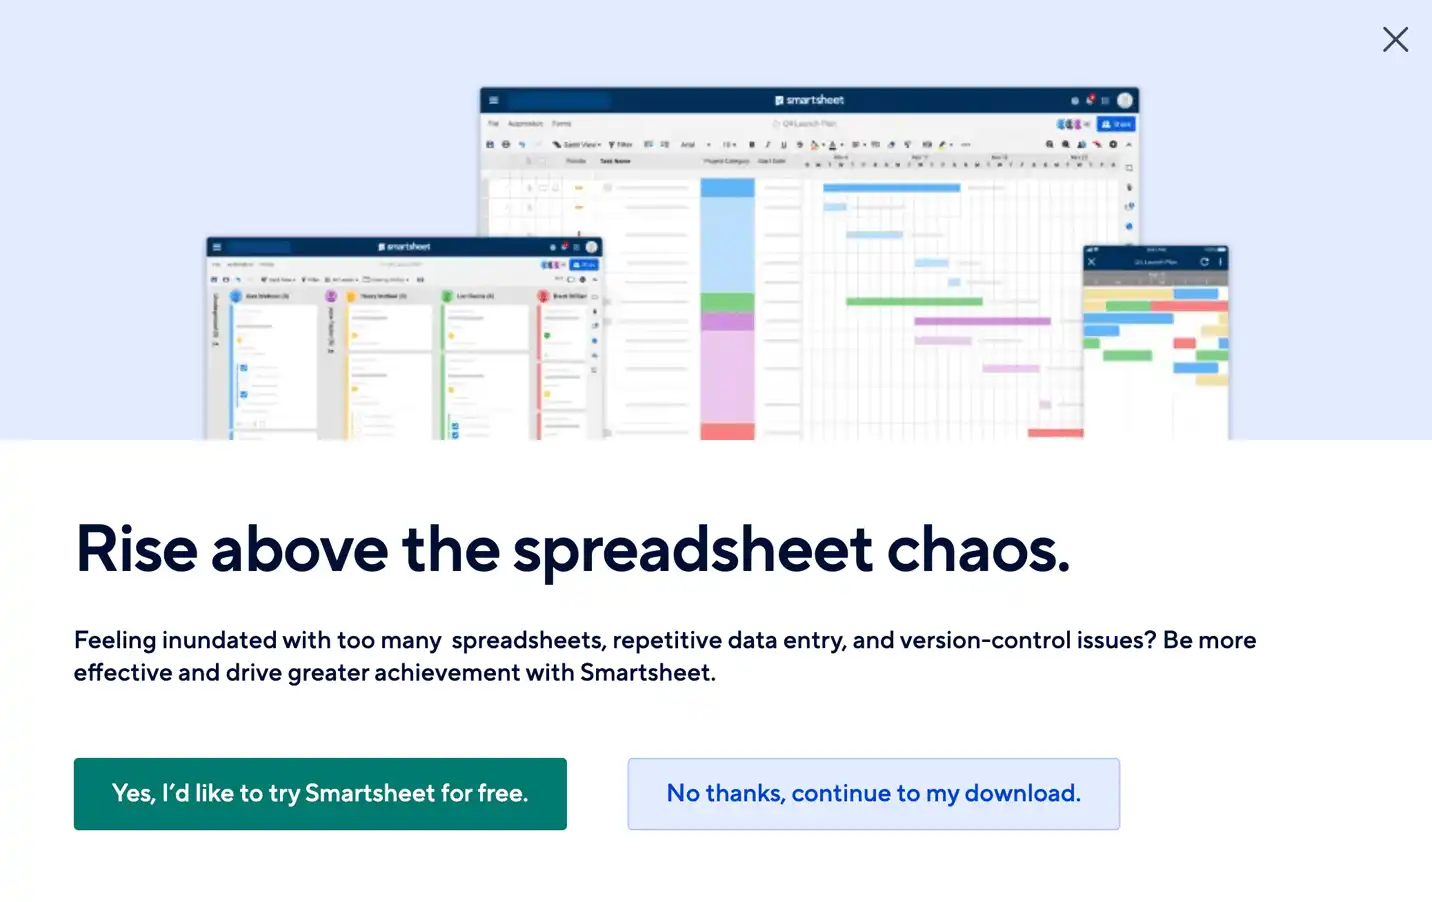 A screenshot of a gated template pop-up from Smartsheet